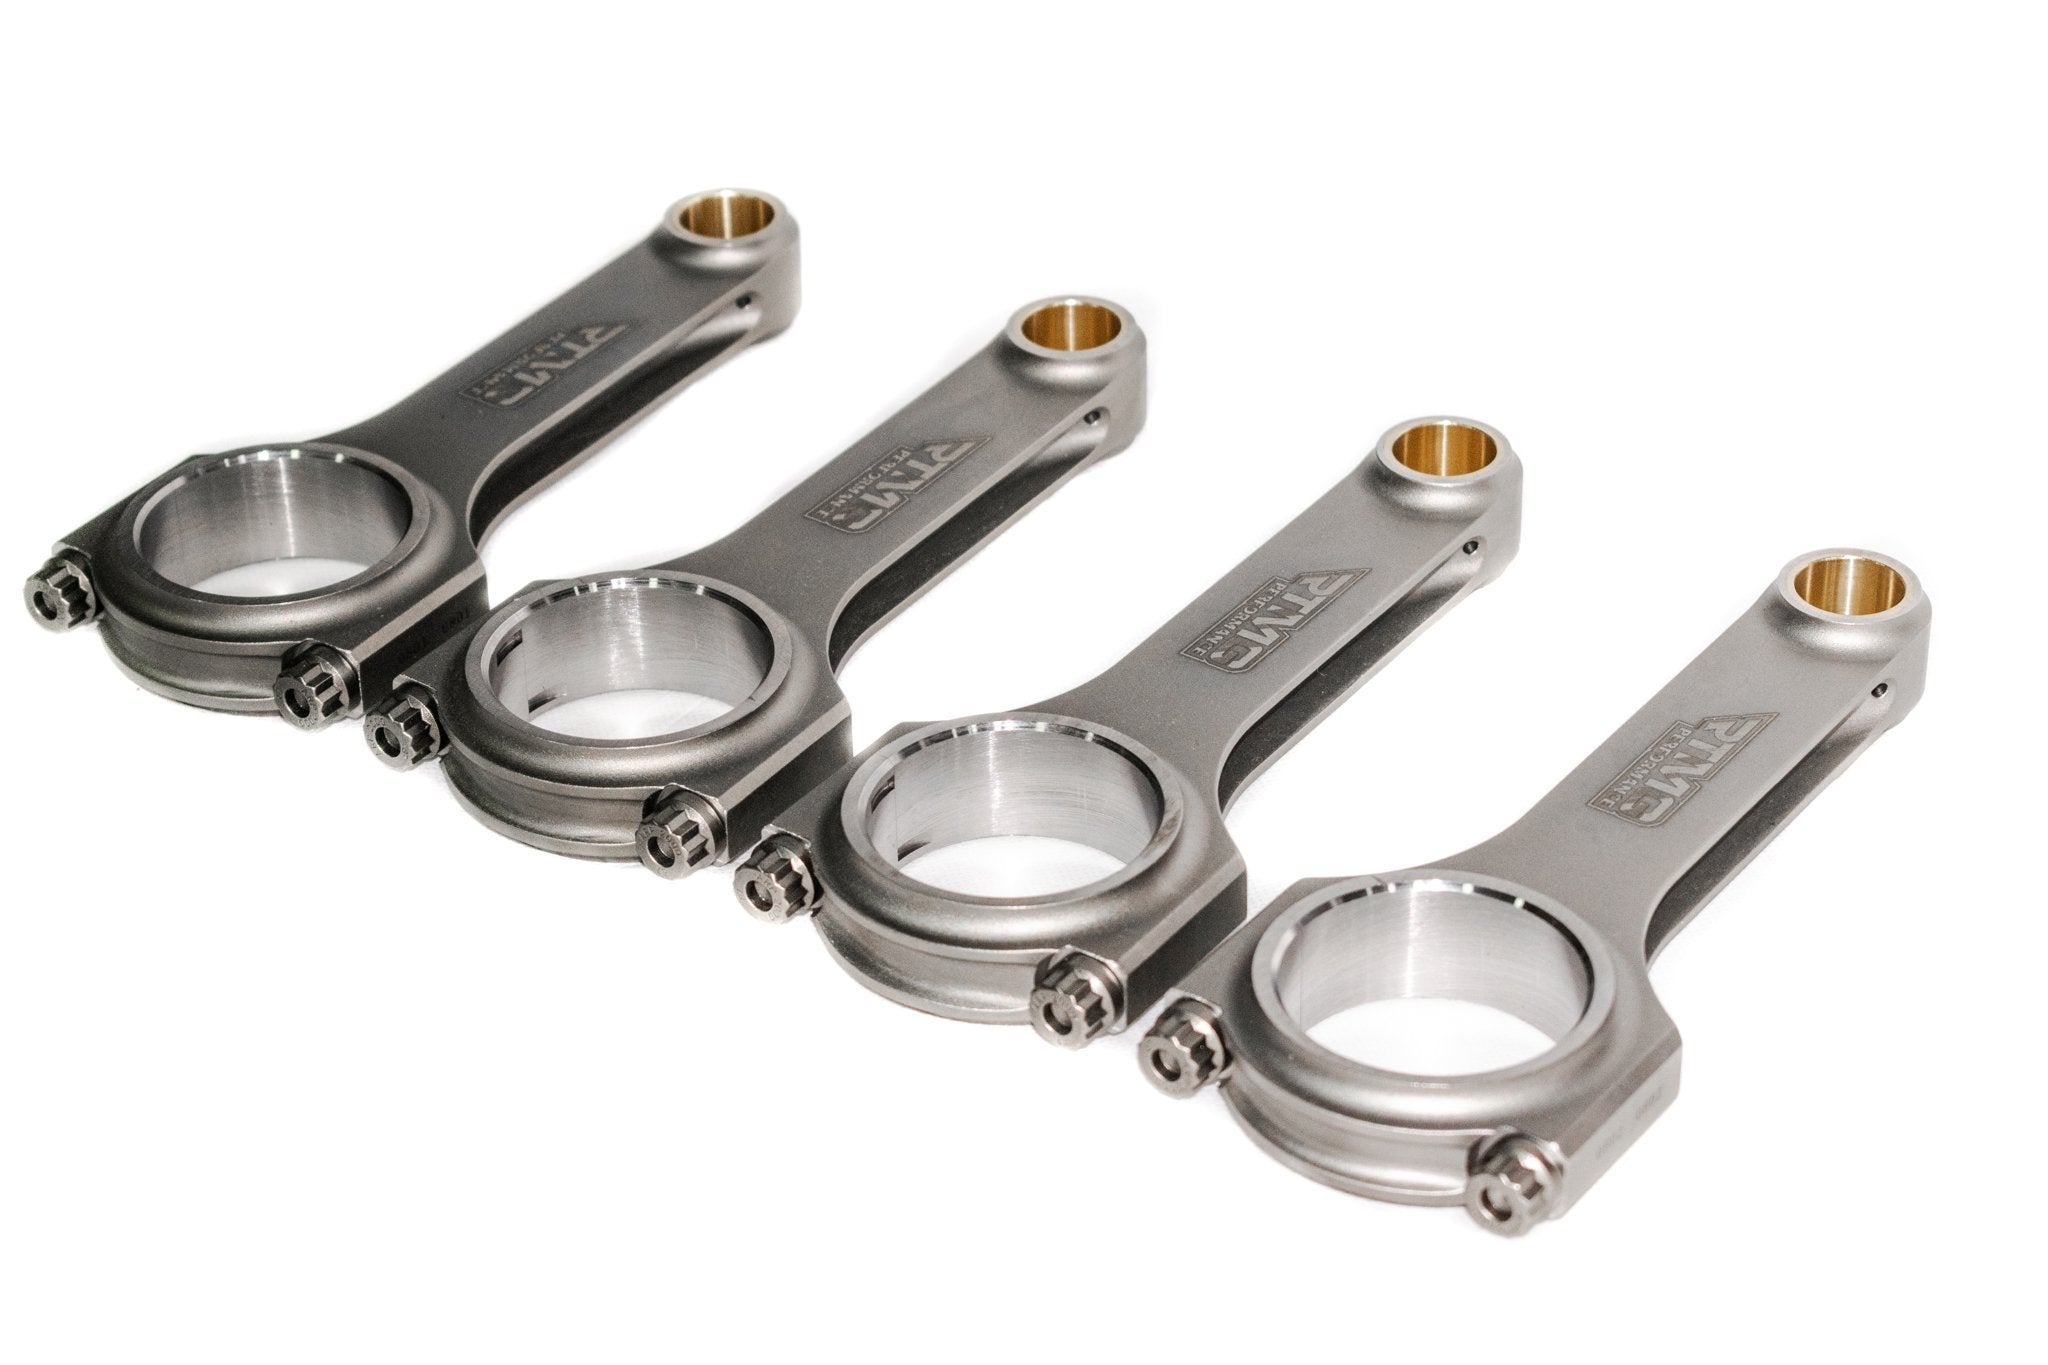 Connecting Rods Set for 1.8 TSI EA888 - Up to 600HP - RTMG Performance